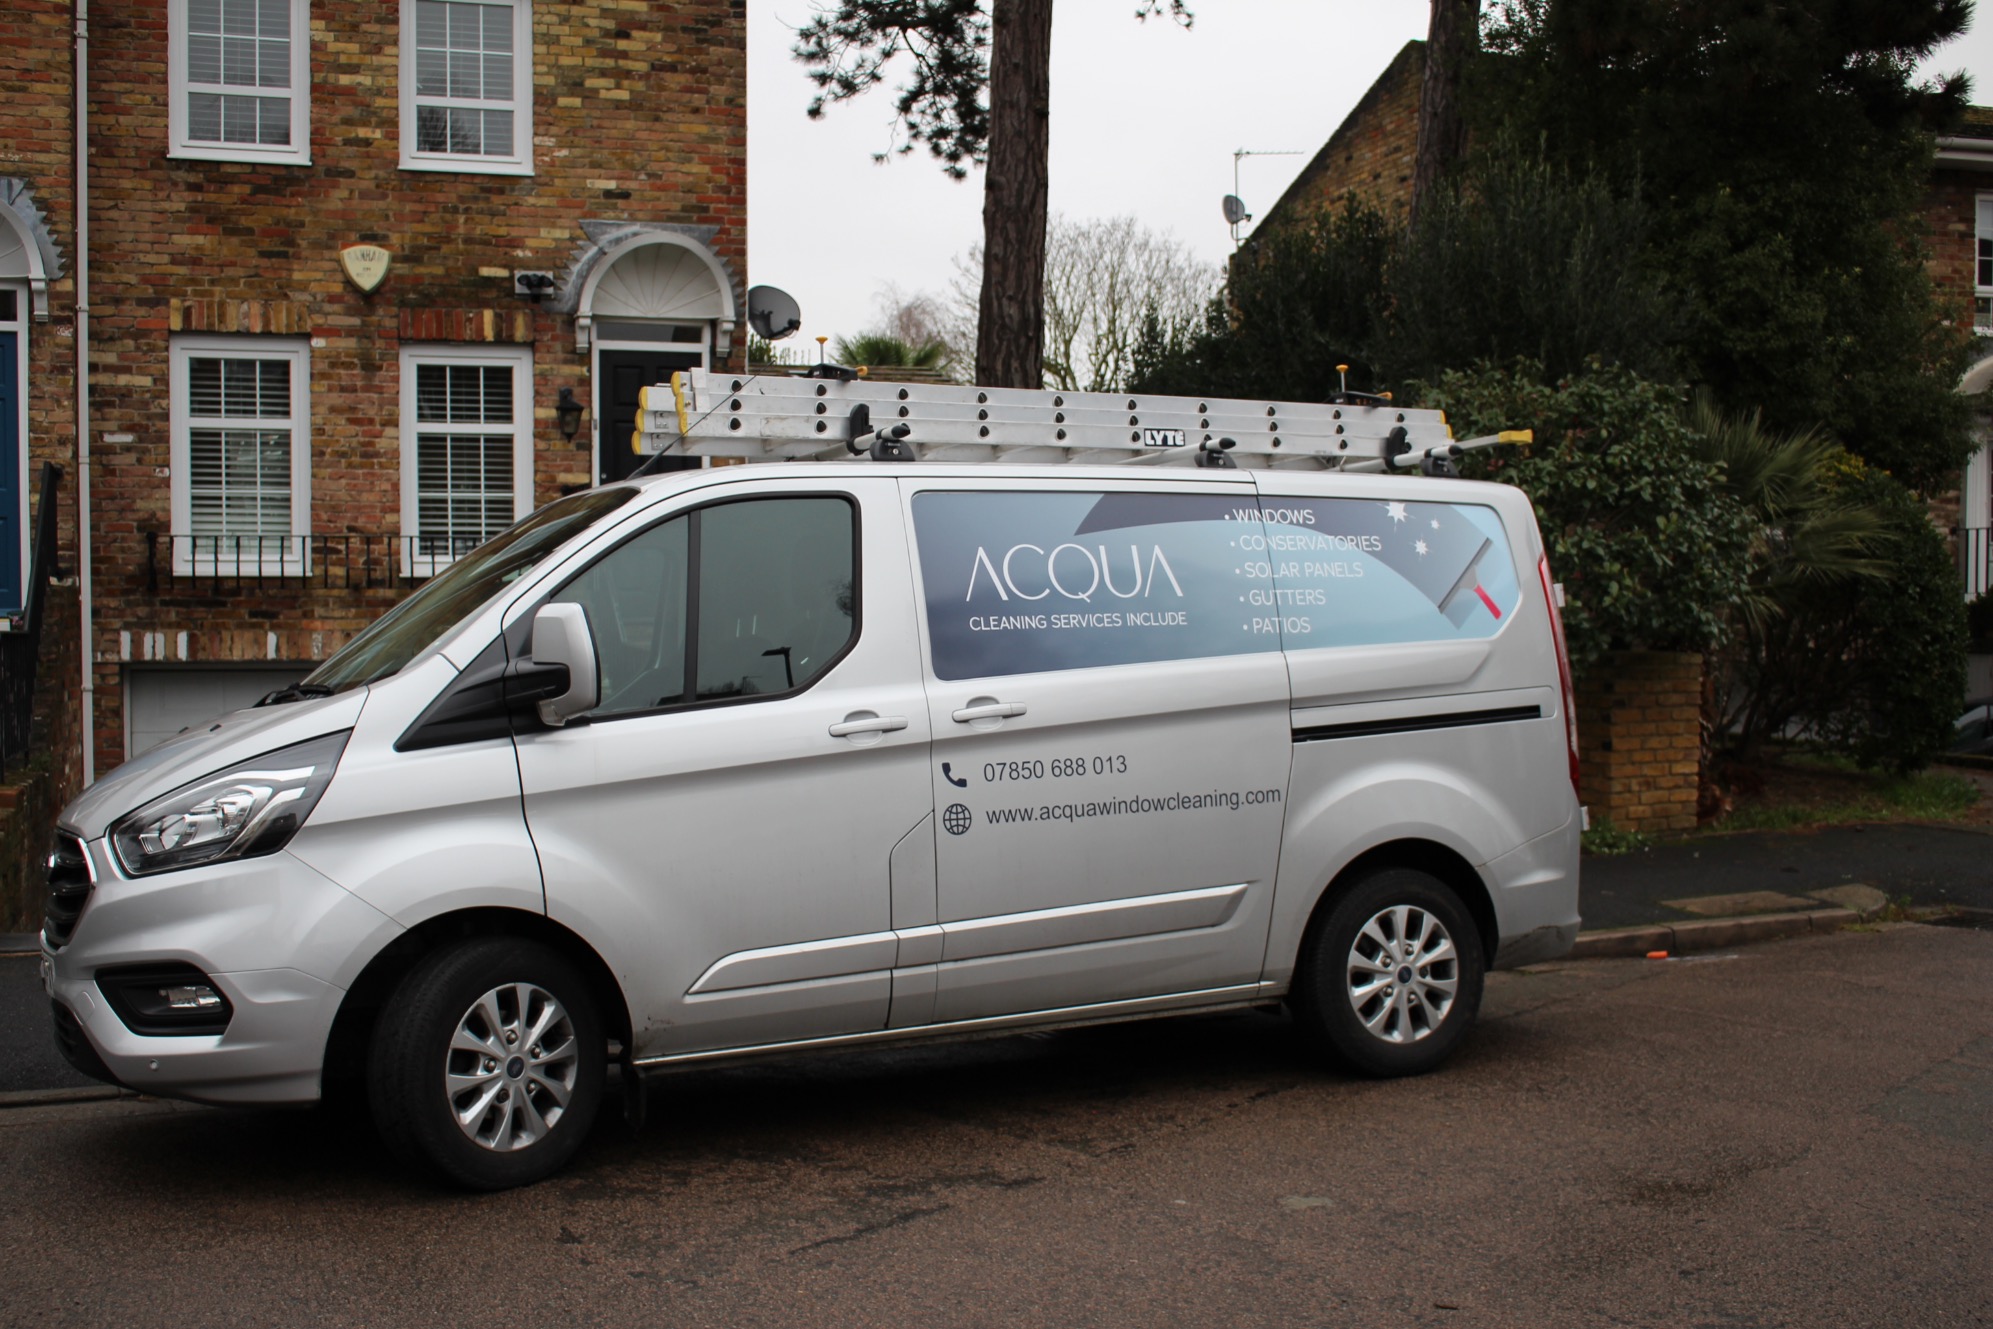 Main image for Acqua Window Cleaning